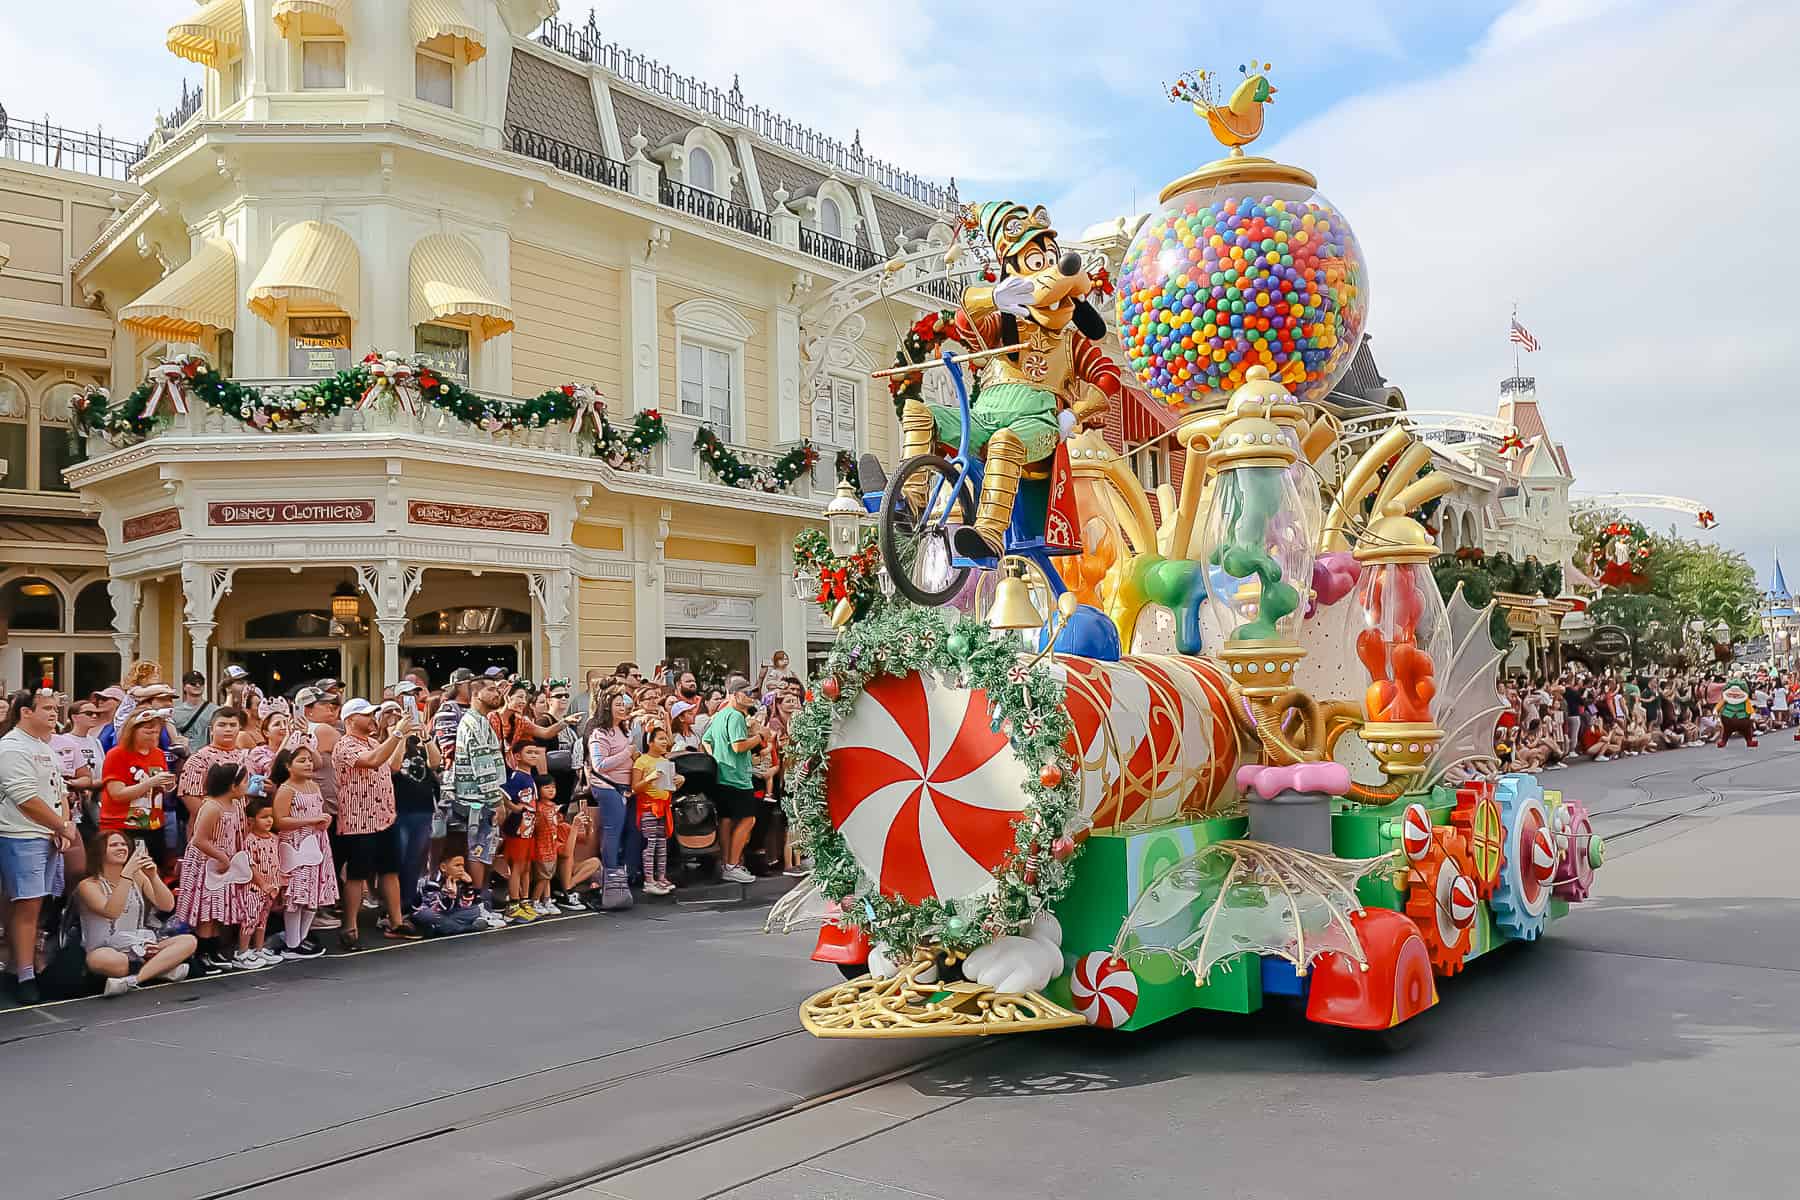 Goofy waves to the crowd from his Christmas parade float. 